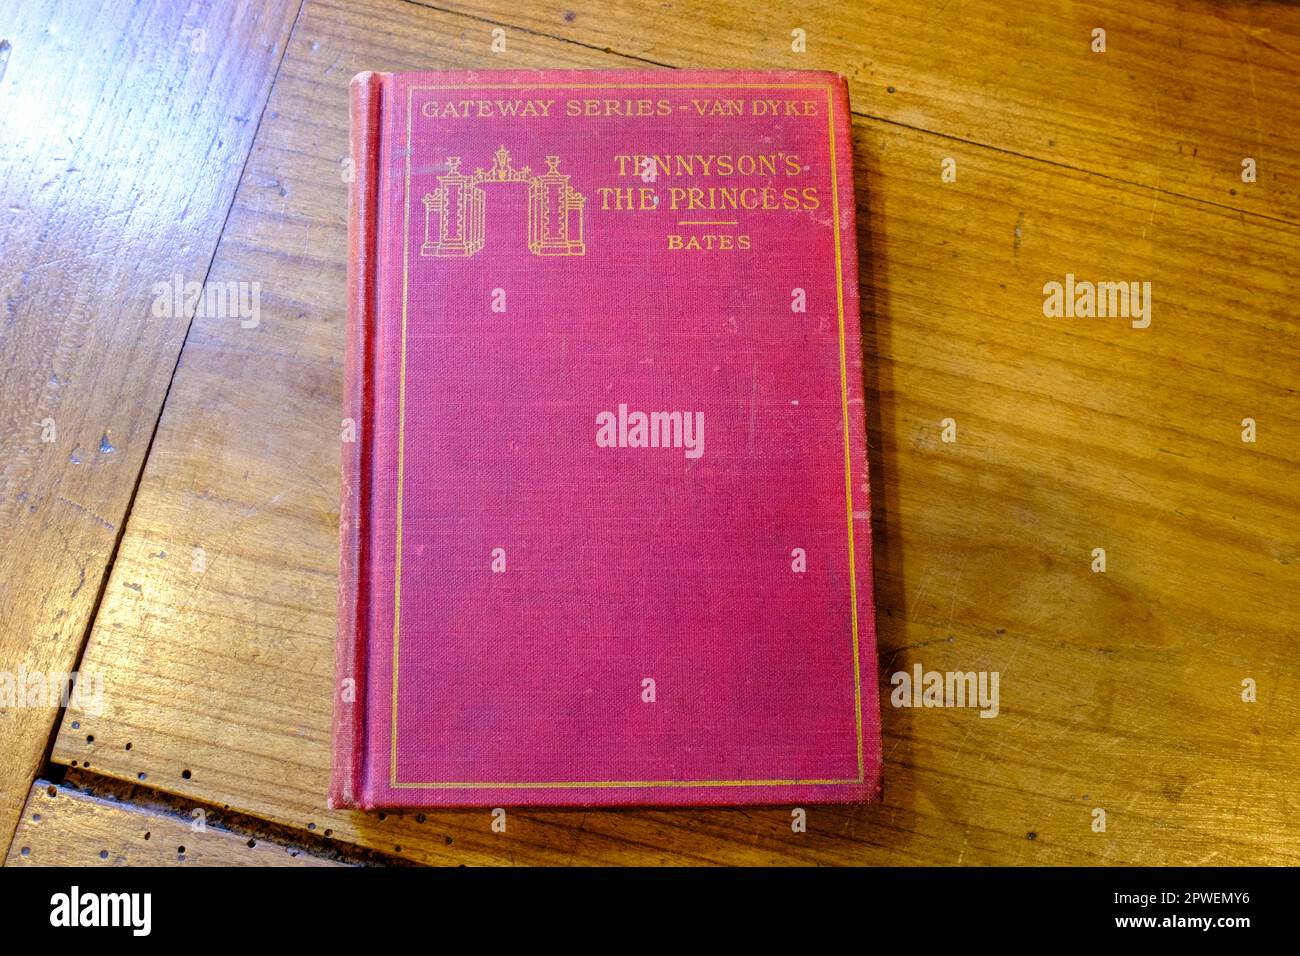 NEW ORLEANS, LA, USA - APRIL 28, 2023: Front cover of vintage copy of Tennyson's 'The Princess' of the Gateway Series, edited by Henry Van Dyke Stock Photo